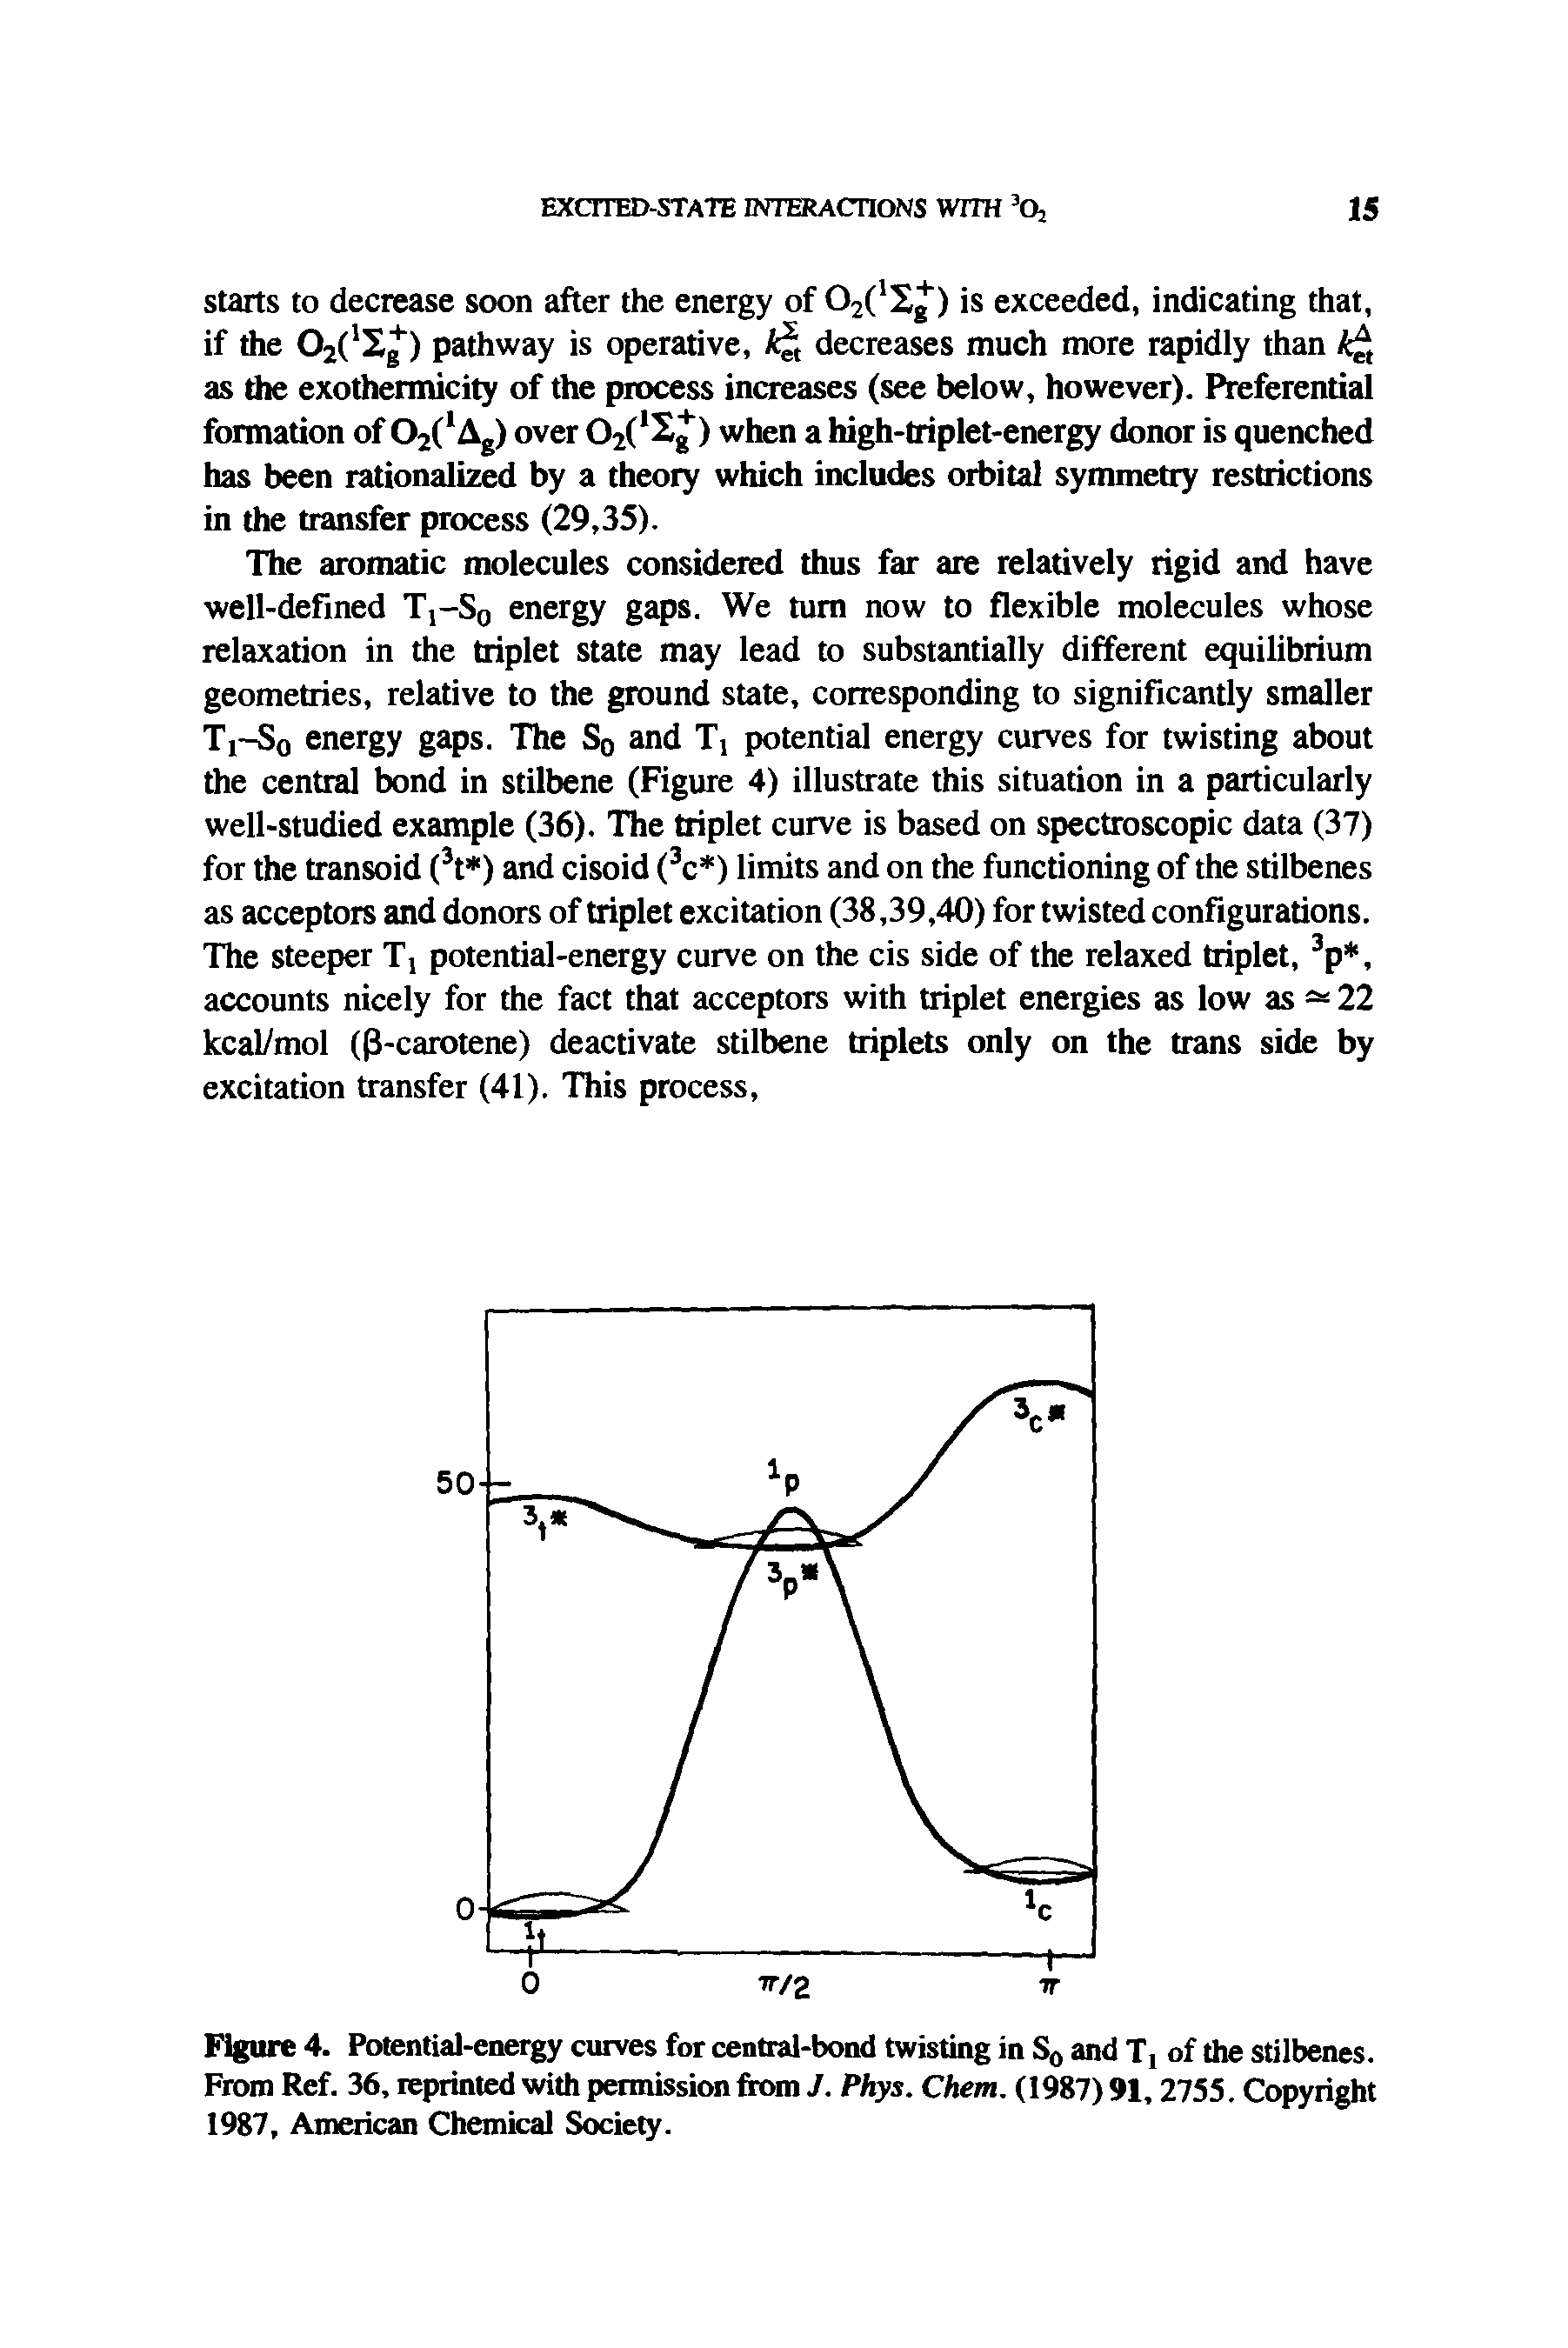 Figure 4. Potential-energy curves for central-bond twisting in So and T, of the stilbenes. From Ref. 36, reprinted with permission from 7. Phys. Chem. (1987)91,2755. Copyright 1987, American Chemical Society.